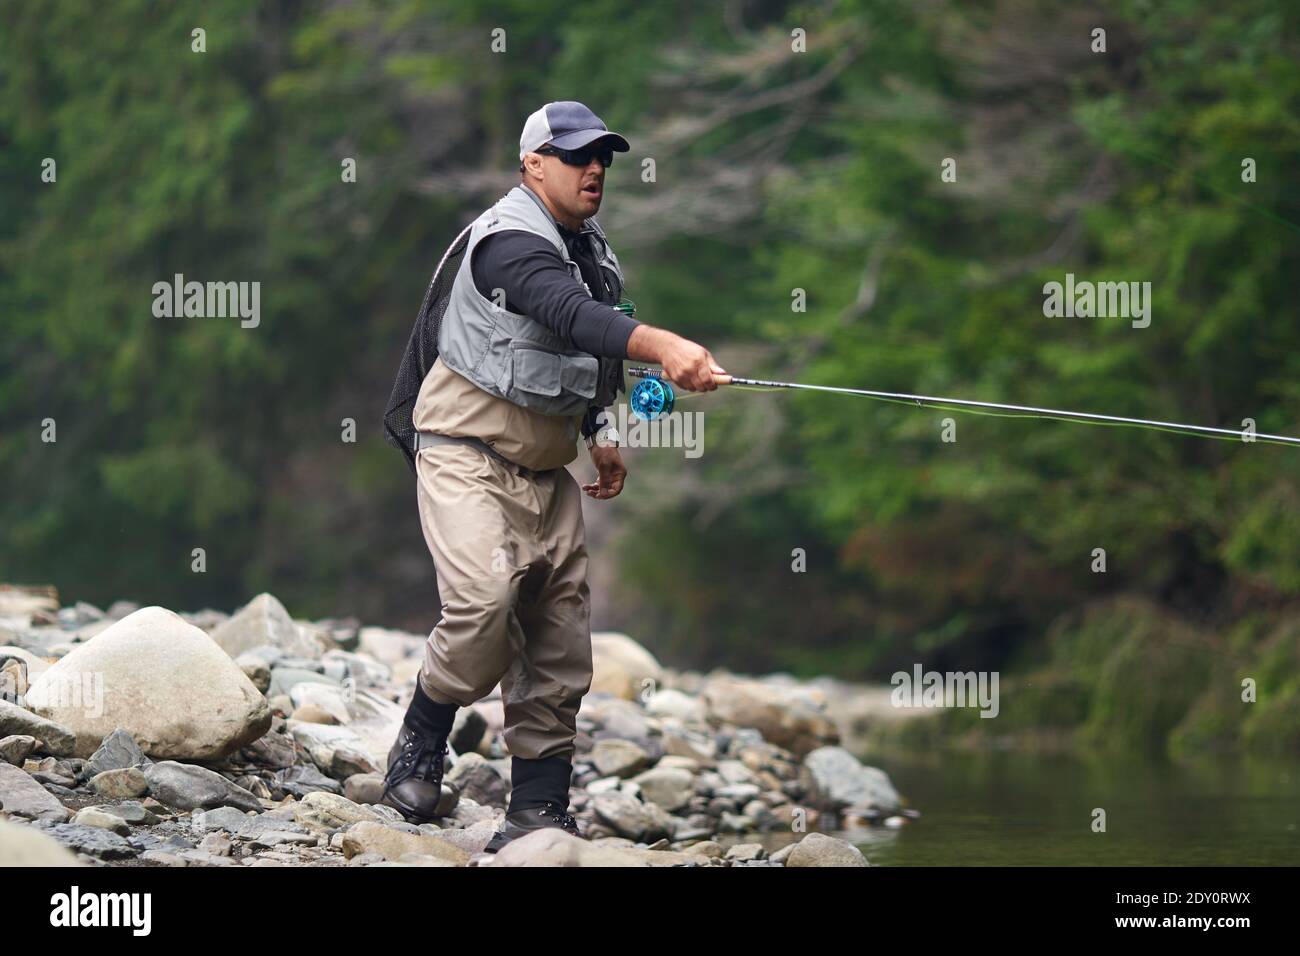 https://c8.alamy.com/comp/2DY0RWX/competent-fishermen-in-cap-glasses-and-waterproof-outfit-fishing-with-rod-among-mountains-man-standing-in-river-and-catching-fish-on-hook-2DY0RWX.jpg